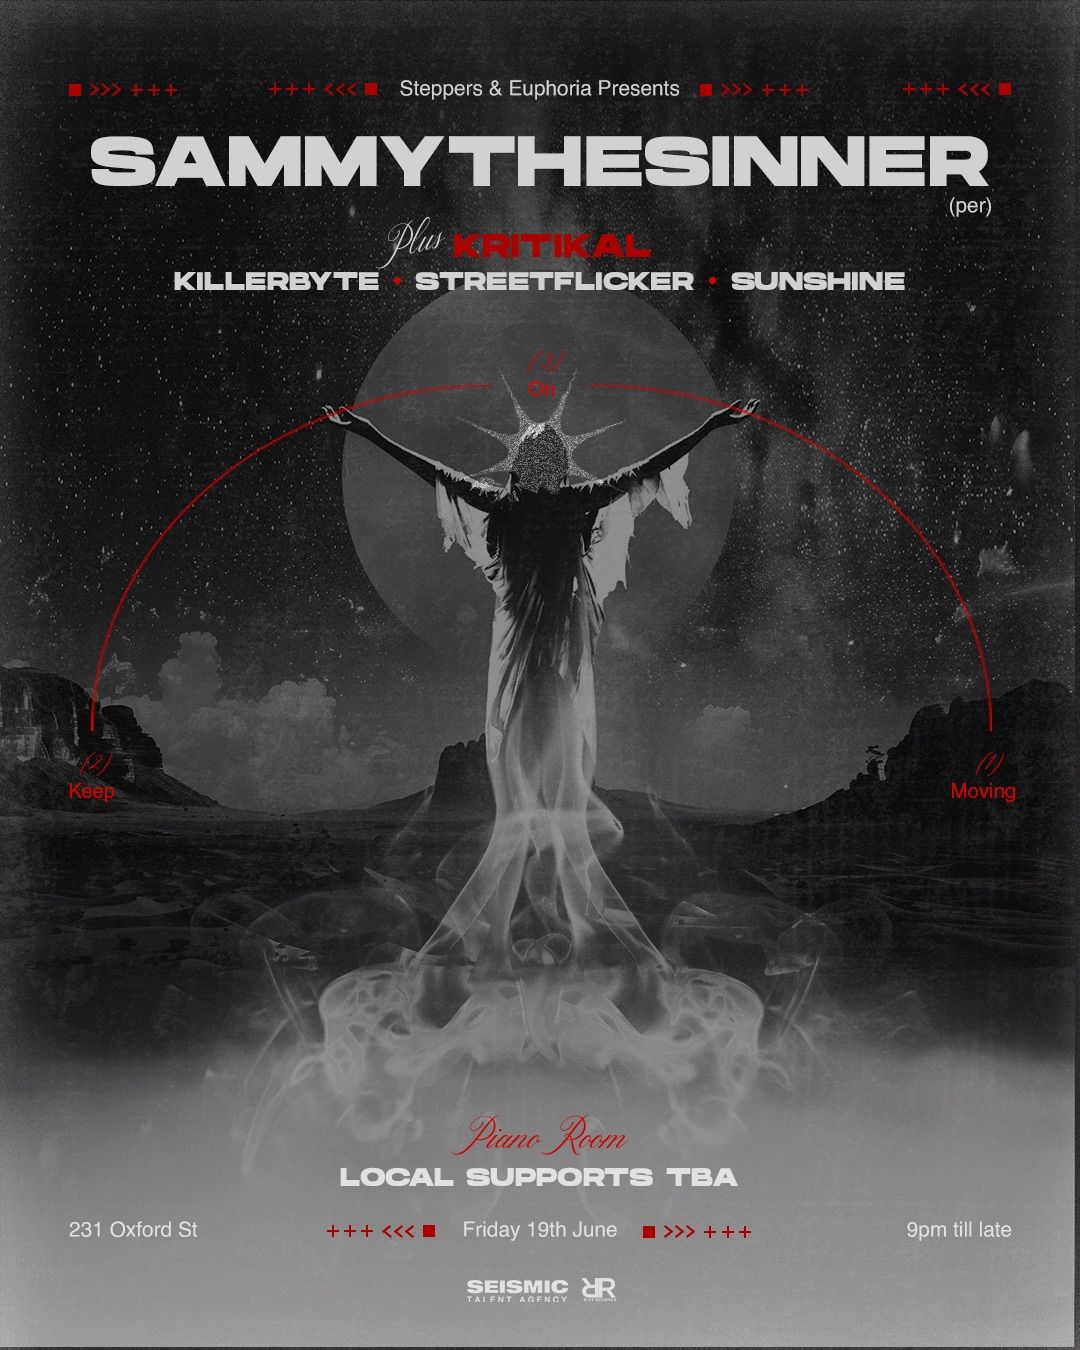 STEPPERS ft. SAMMY THE SINNER (ASCENDANCE EP TOUR) + SUPPORTS